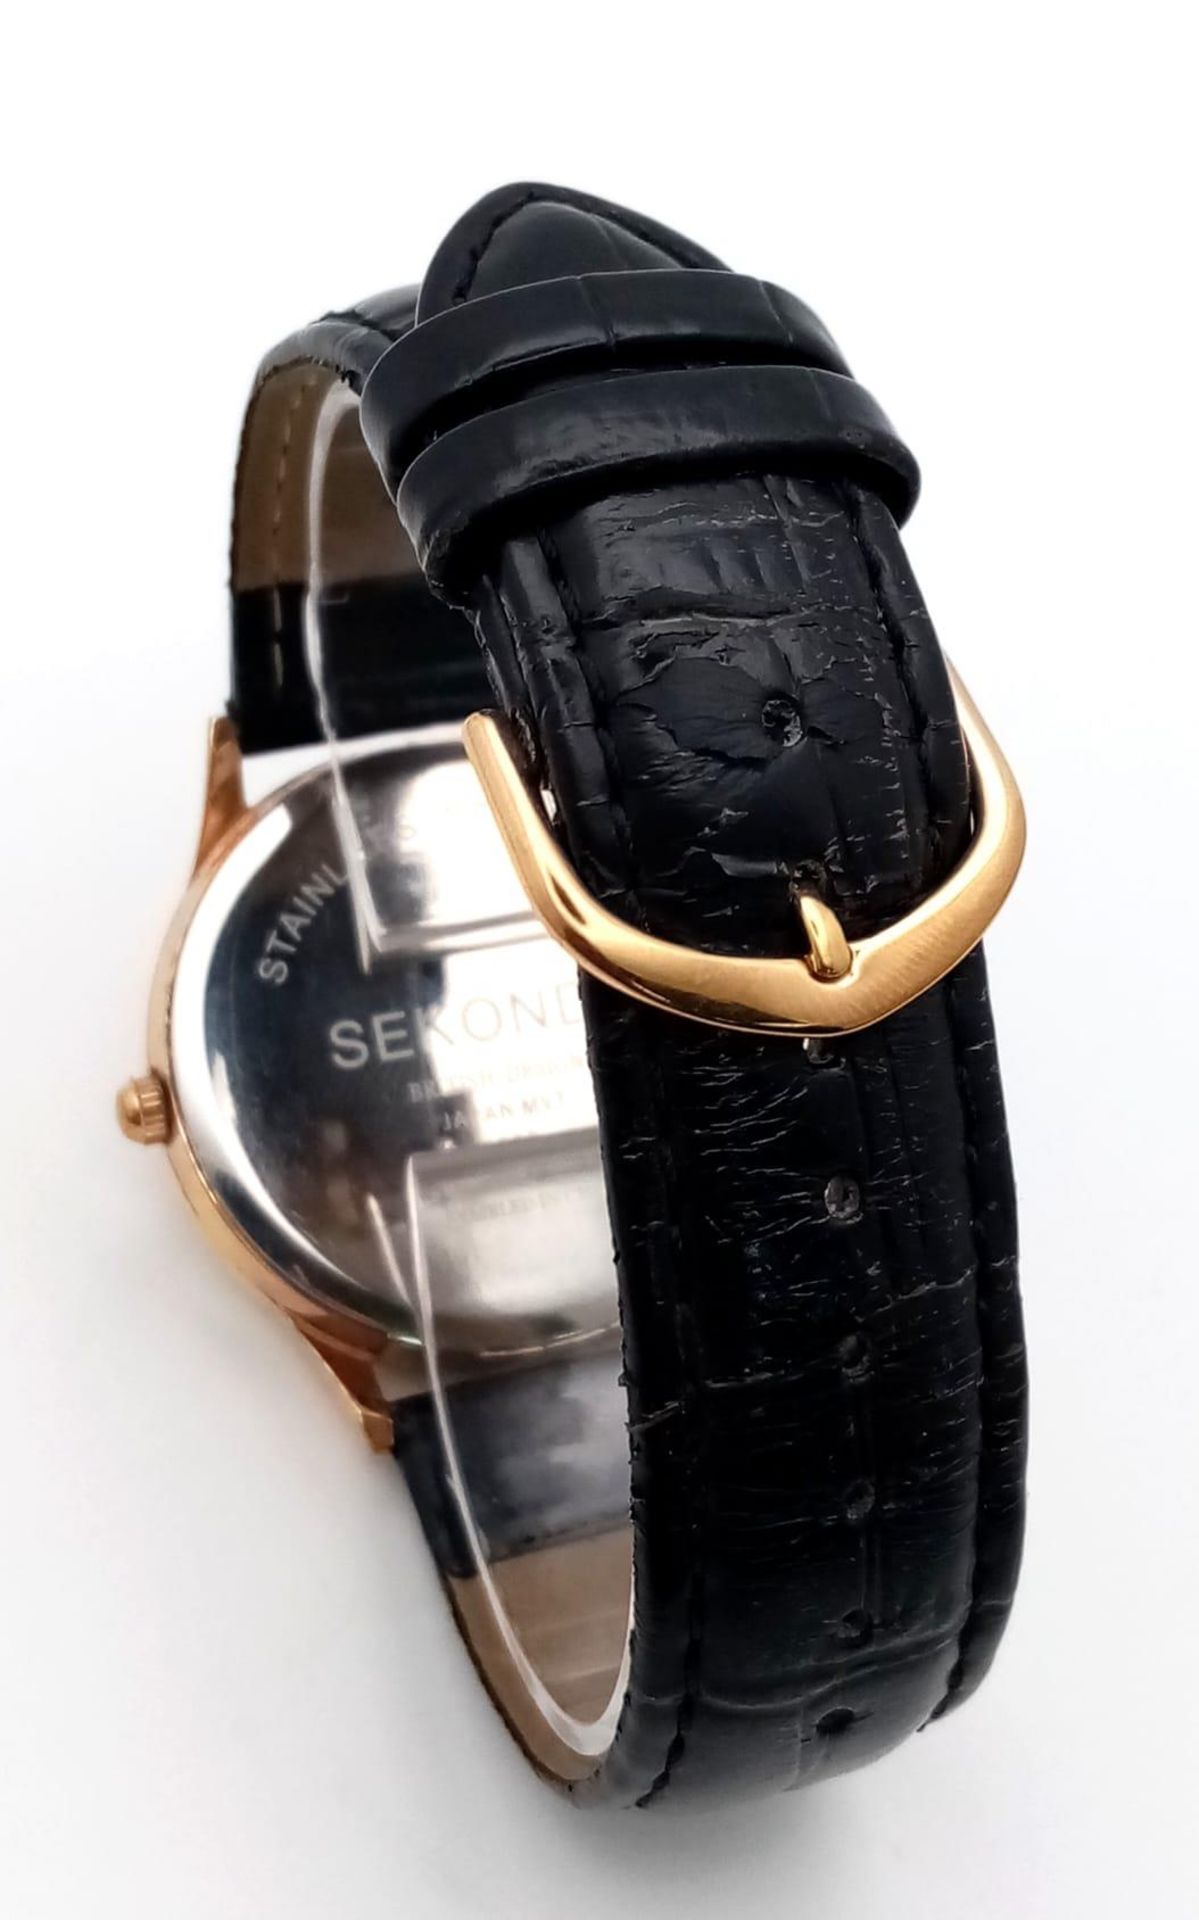 A Sekonda Automatic Skeleton Gents Watch. Black leather strap. Gilded case - 37mm. Skeleton dial. In - Image 5 of 9